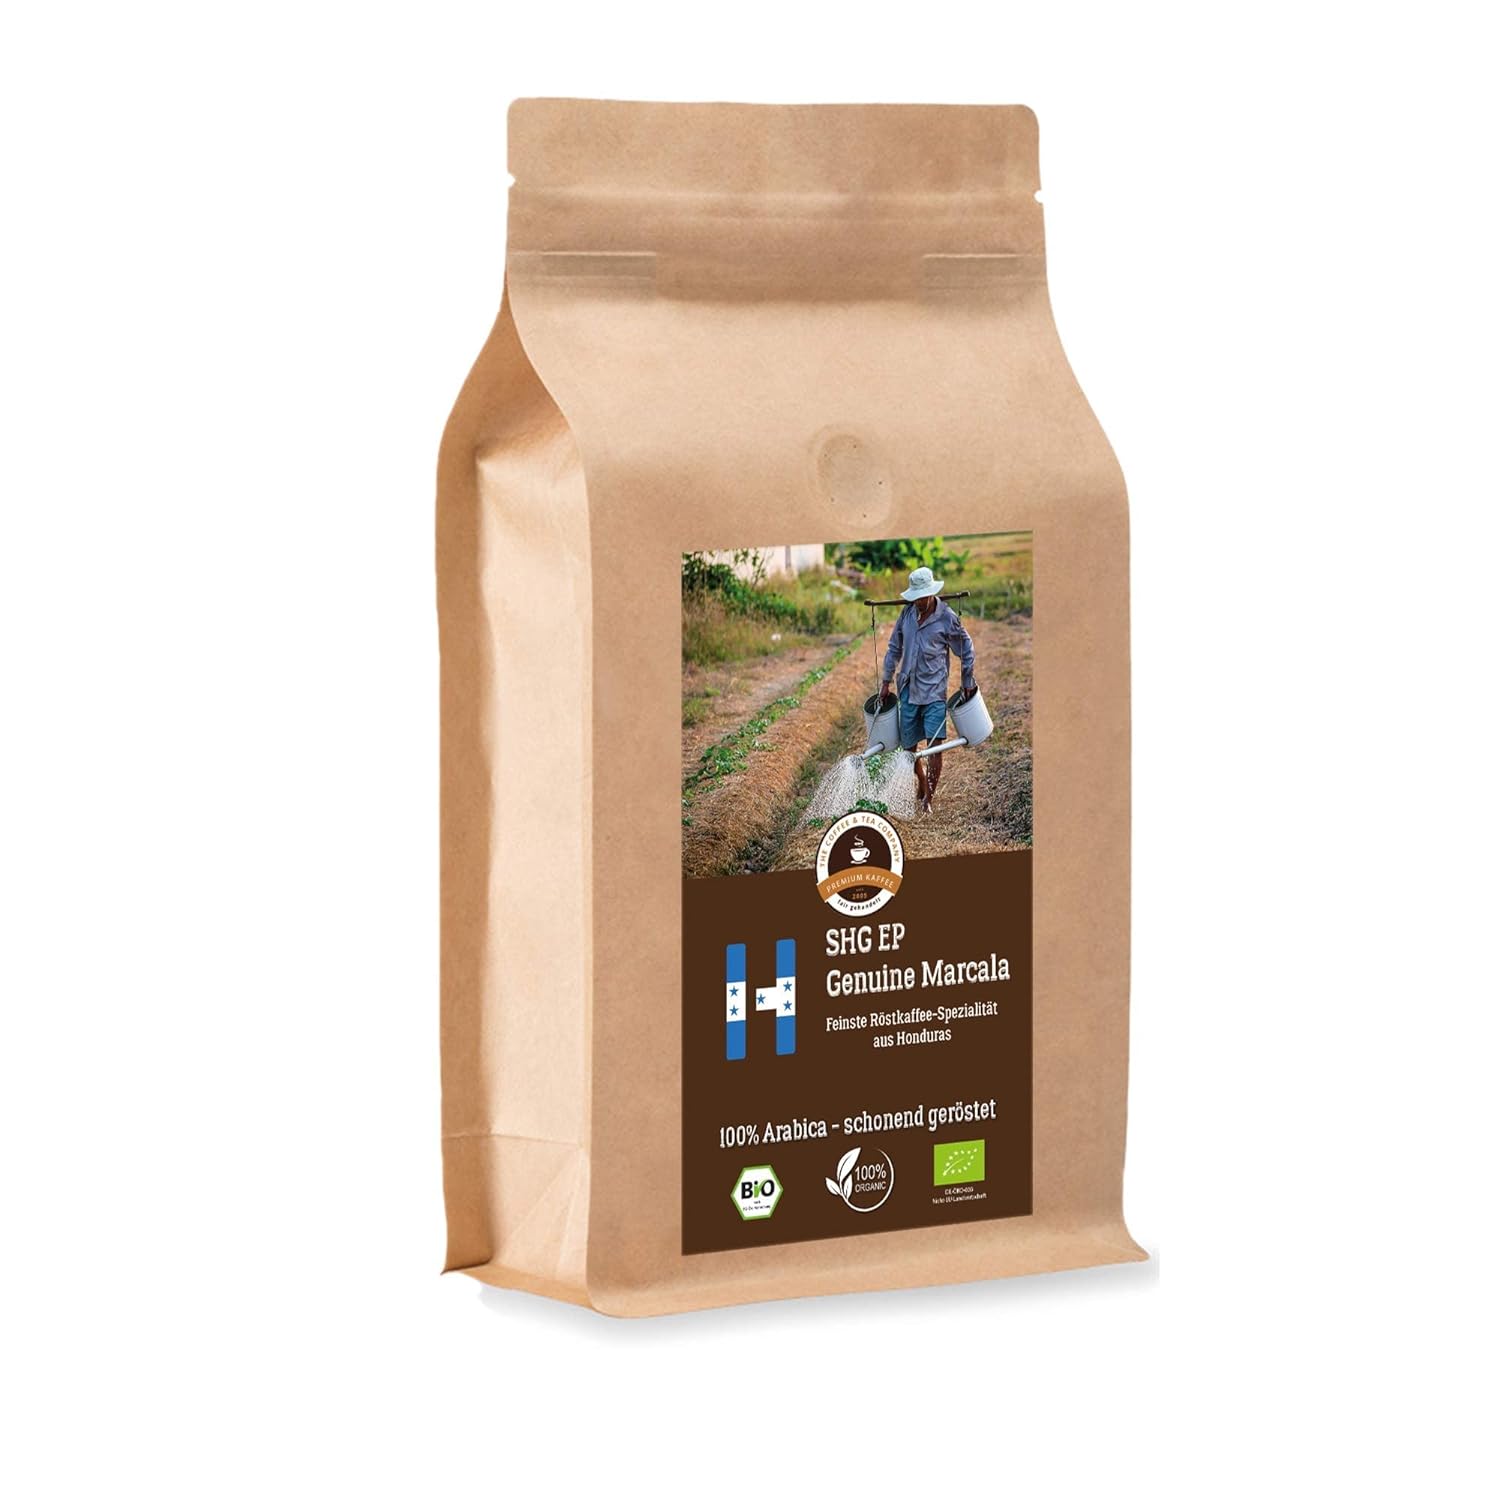 Coffee Globetrotter - Organic Honduras Genuine Marcala - 1000 g Coarse Ground - for Stamp Jug French Press Coffee Maker - Top Coffee - Roasted Coffee from Organic Cultivation